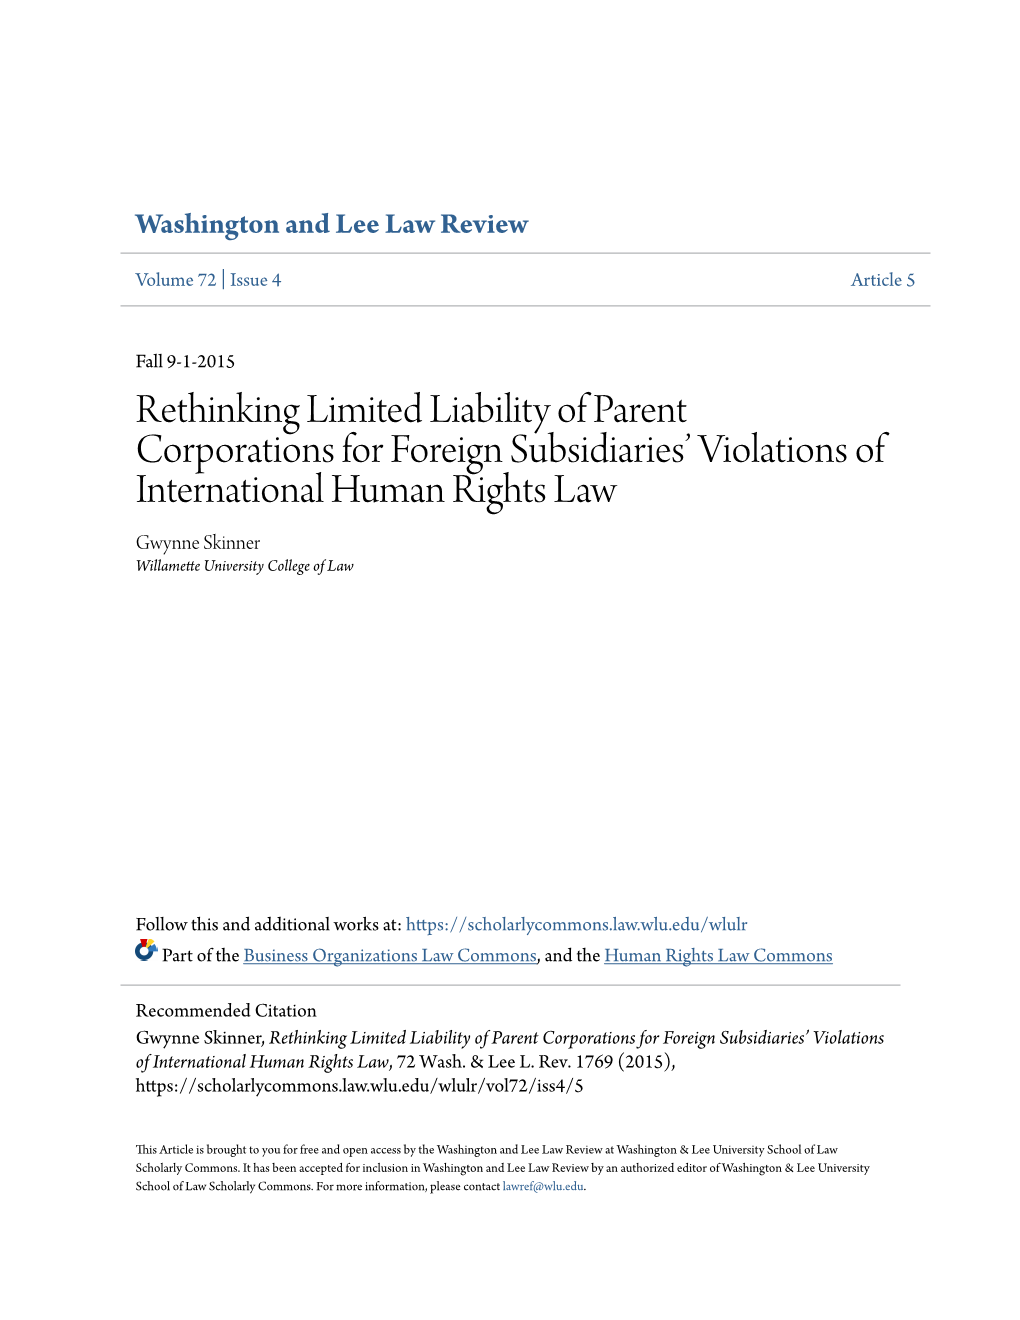 Rethinking Limited Liability of Parent Corporations for Foreign